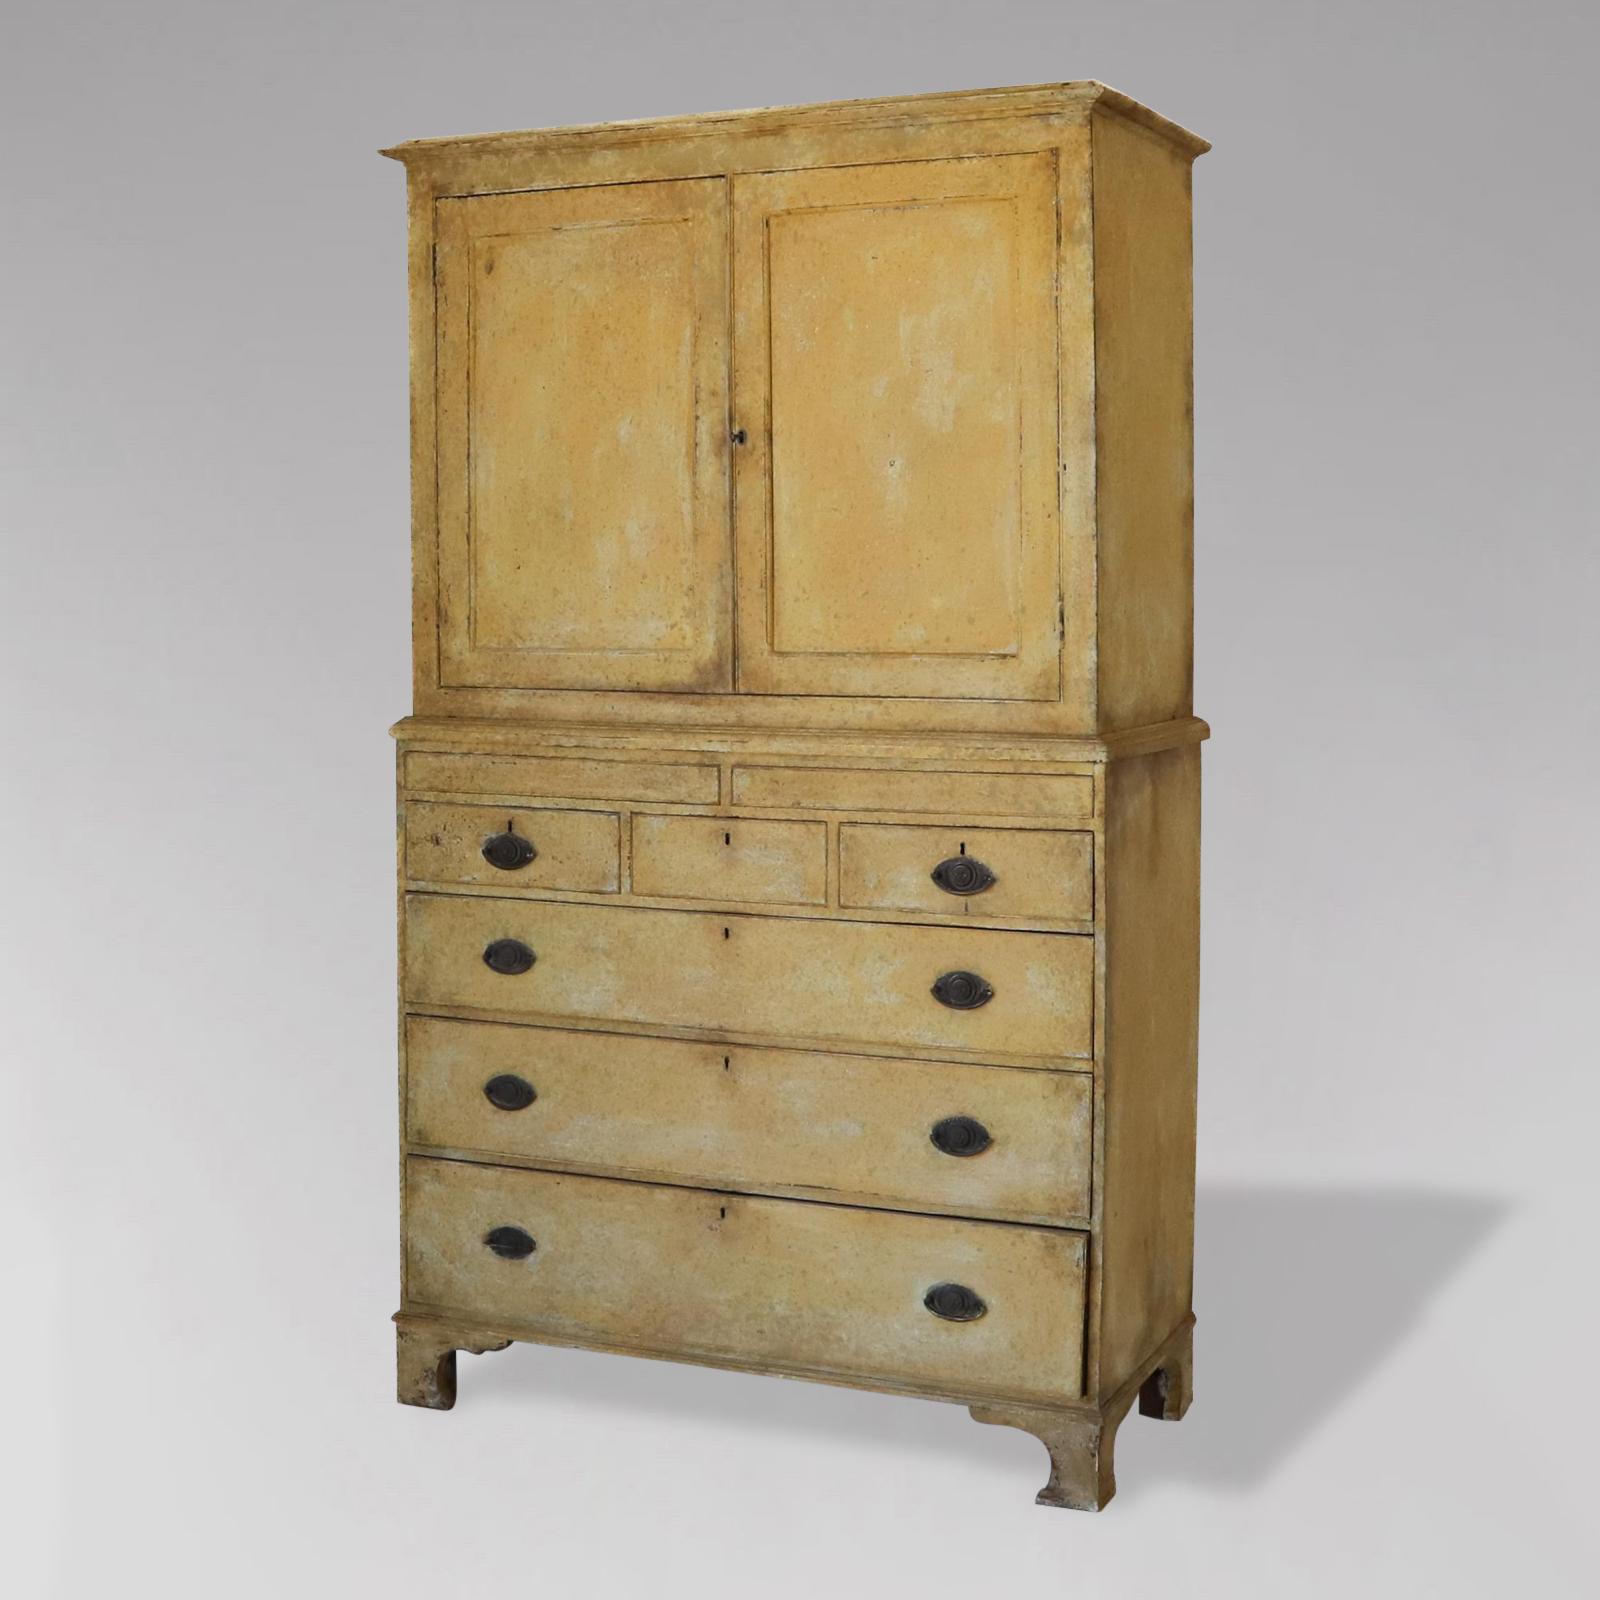 A stunning early 19th century, Georgian period, painted country housekeeper's cupboard with moulded cornice above a pair of panelled doors, enclosing two fixed shelves above two small hidden drawers, three short drawers and three long graduated